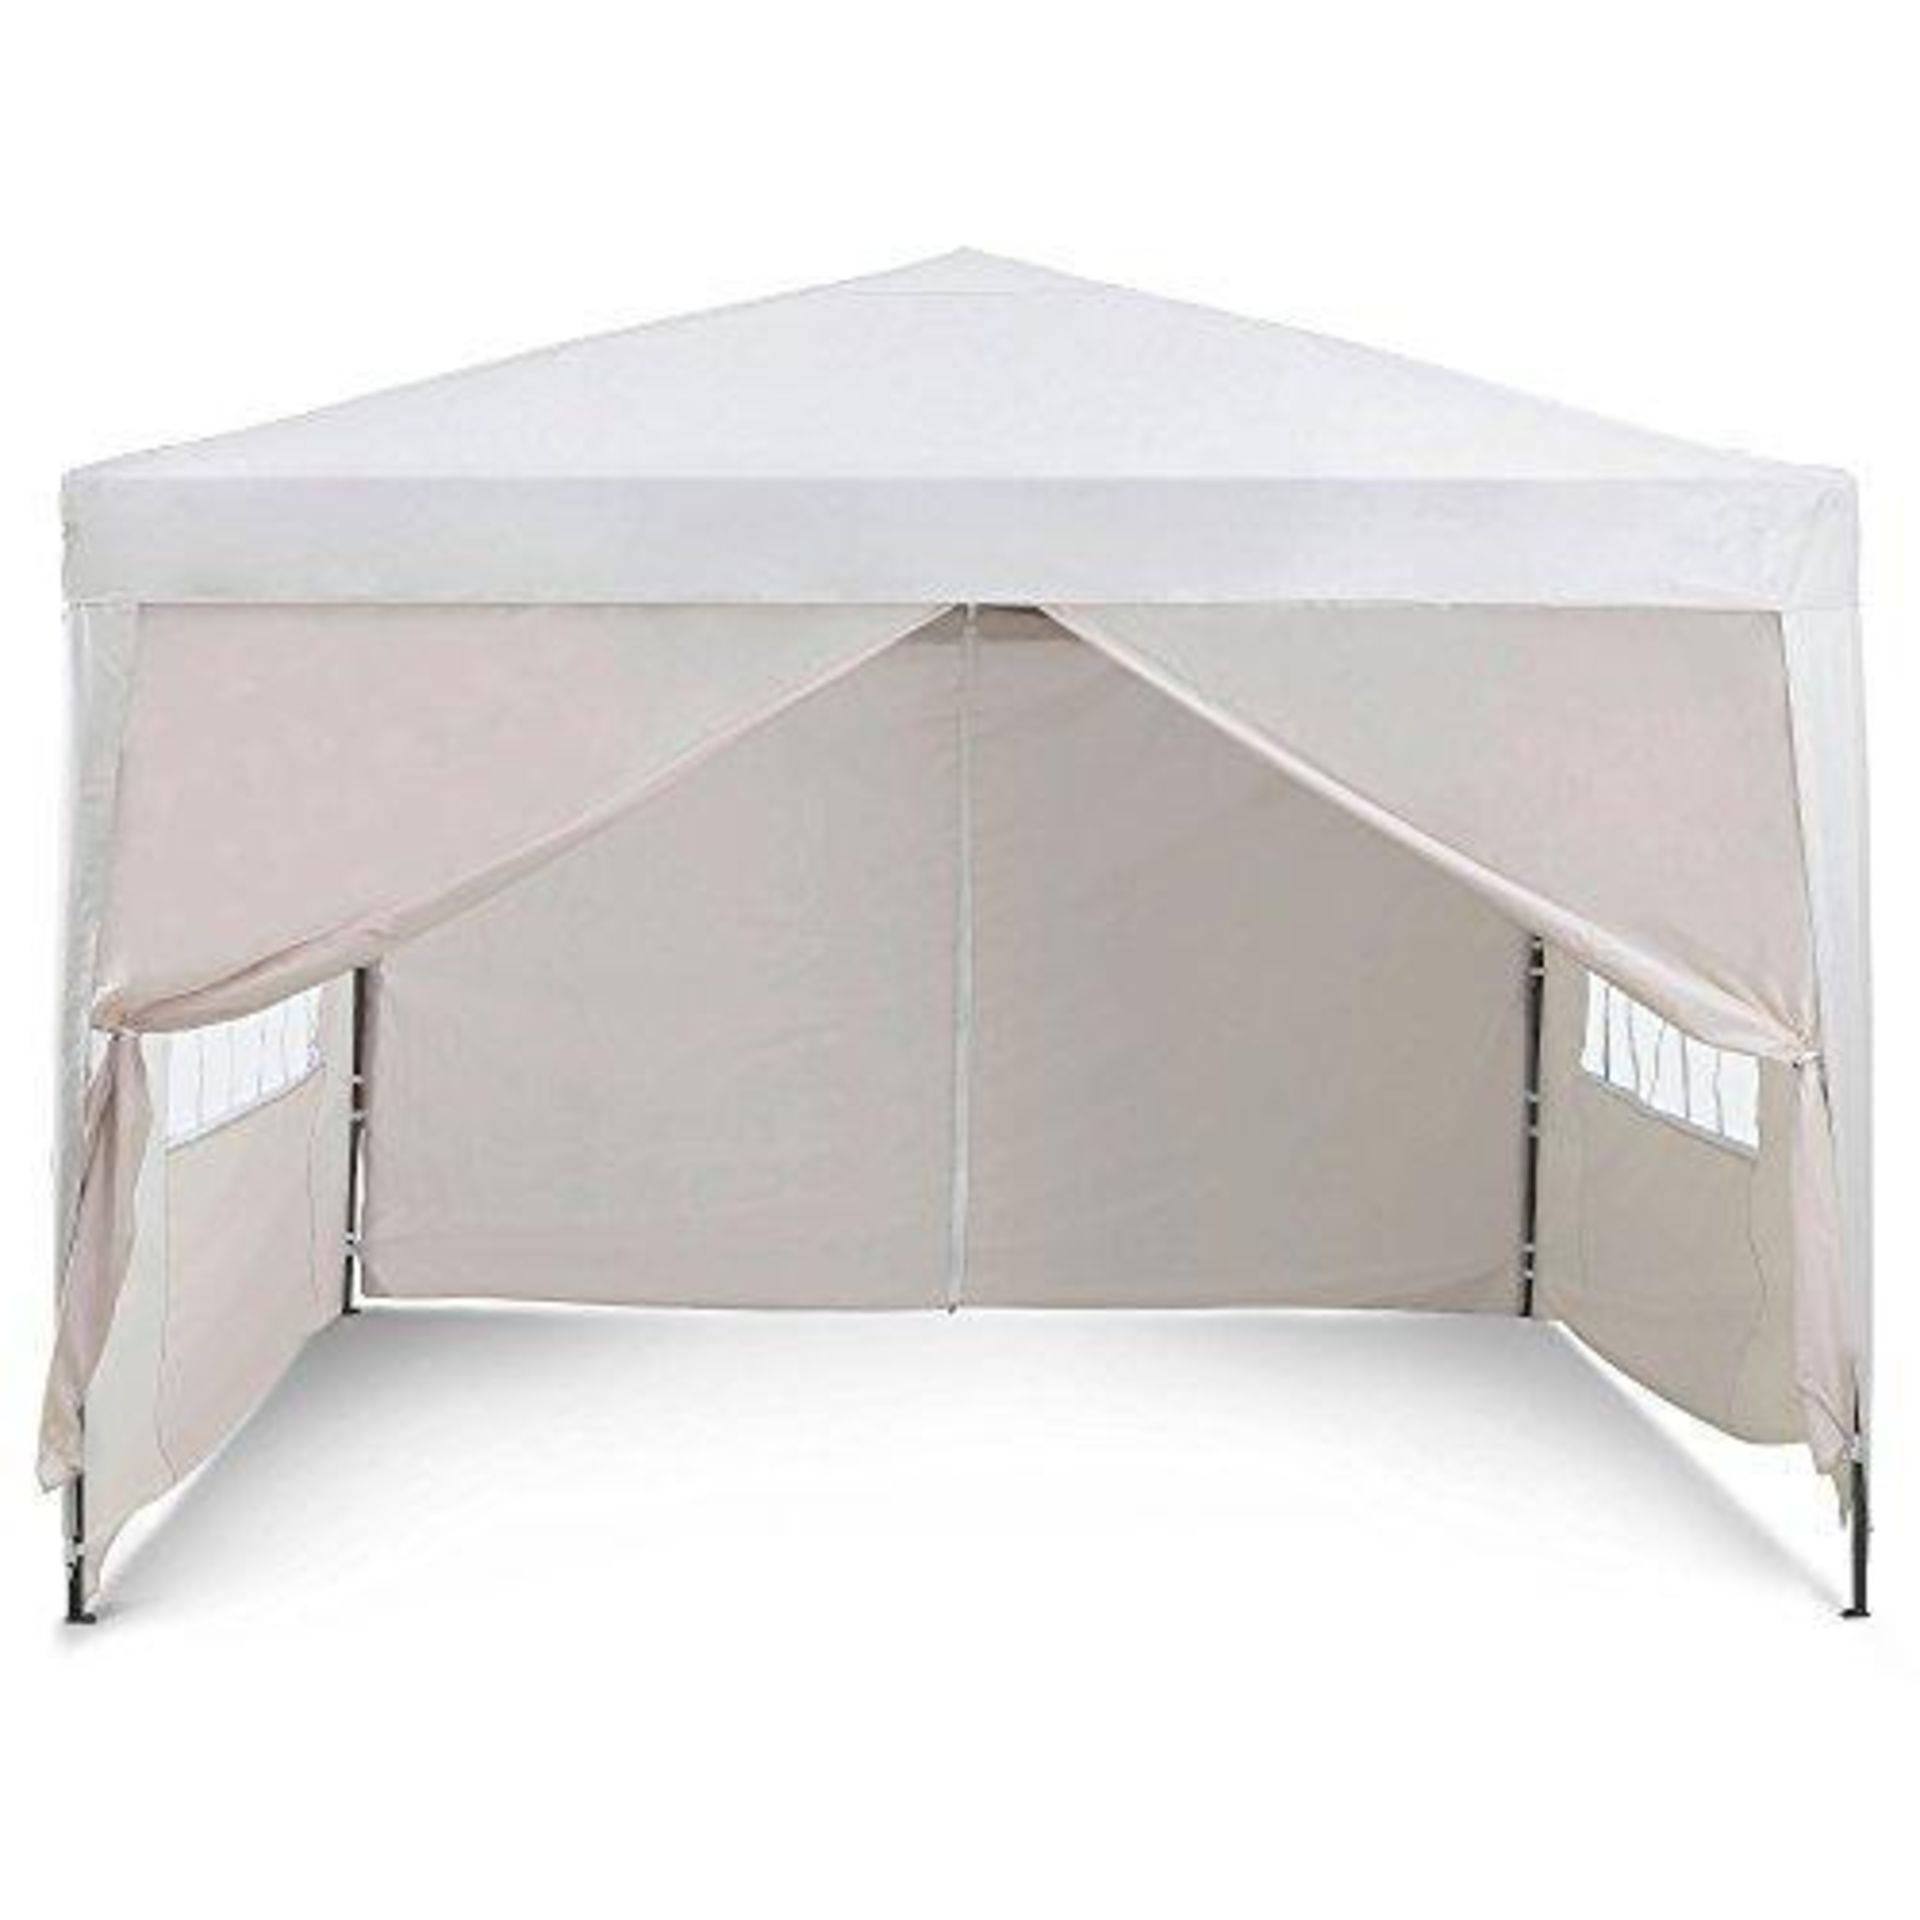 Ivory Pop-up Gazebo Set 3 X 3m Ivory Pop-up Gazebo with WeightsTransform your garden with our 3 x 3m - Image 2 of 5